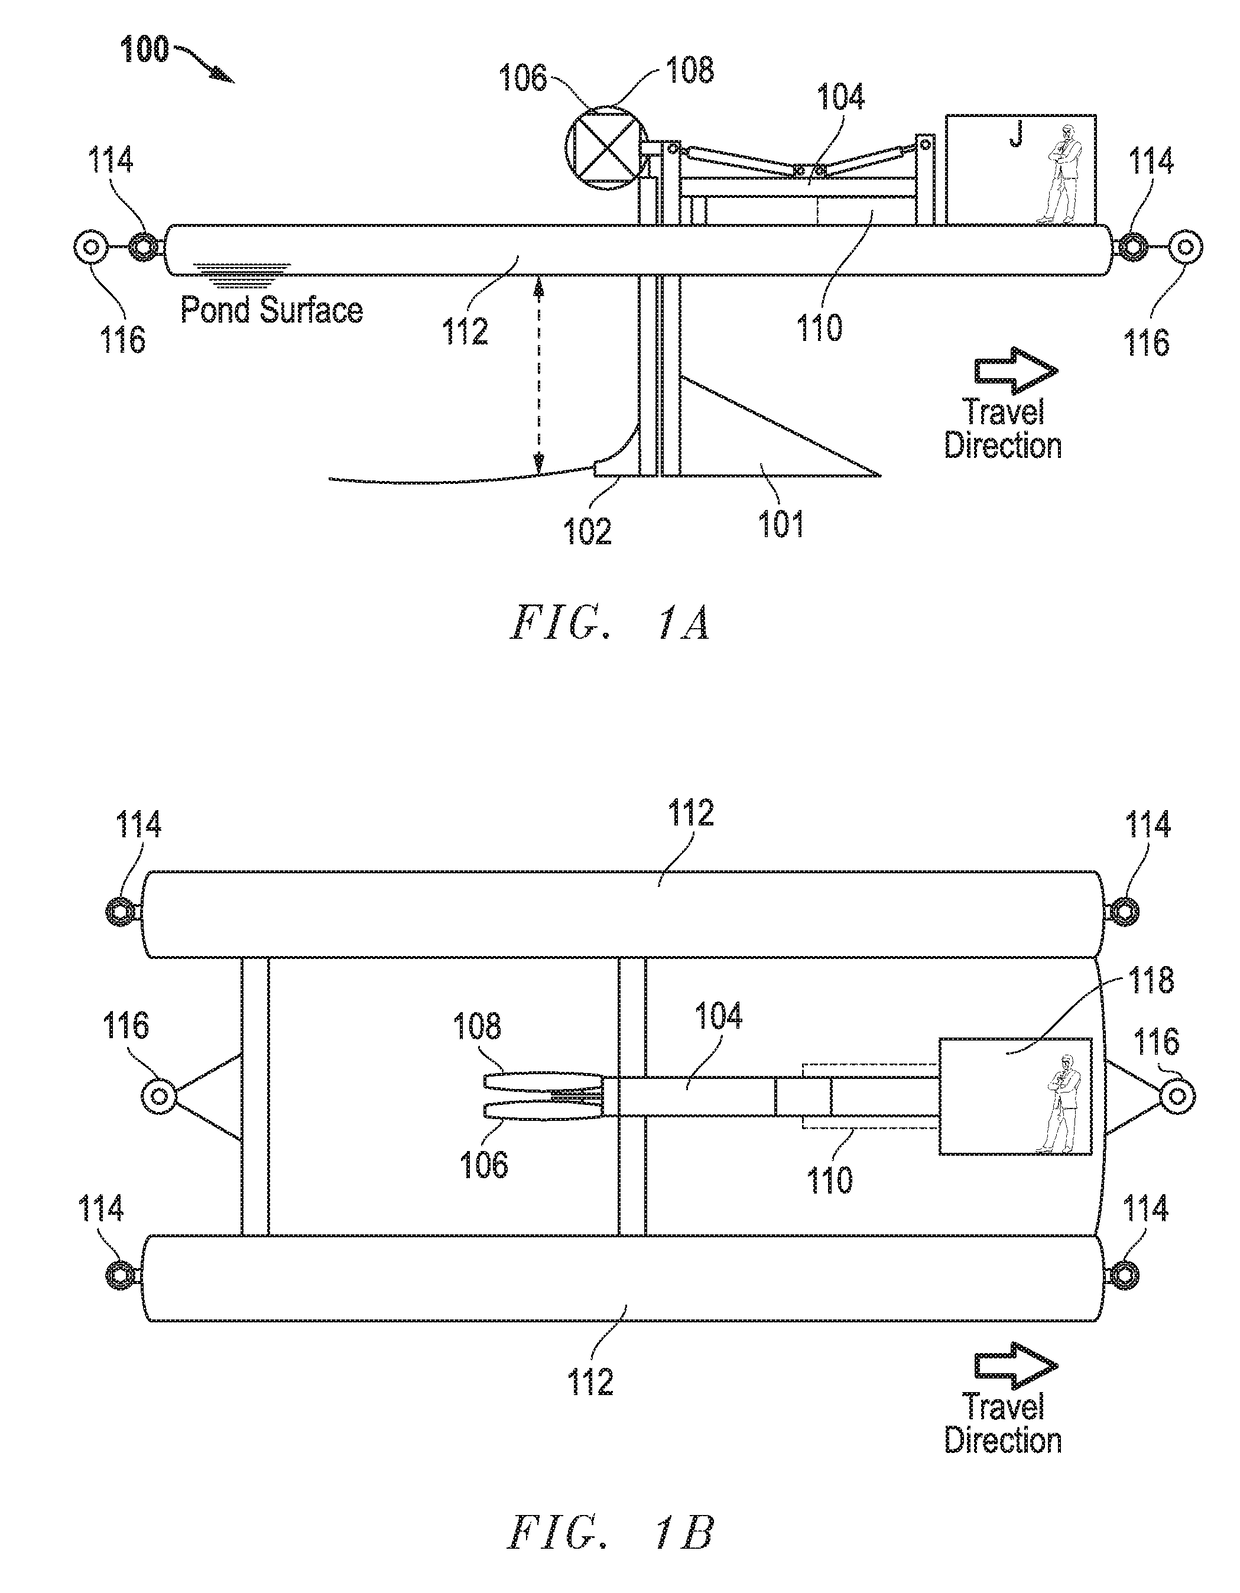 Device for the installation of vacuum consolidation dewatering horizontal drains for dewatering sludge ponds